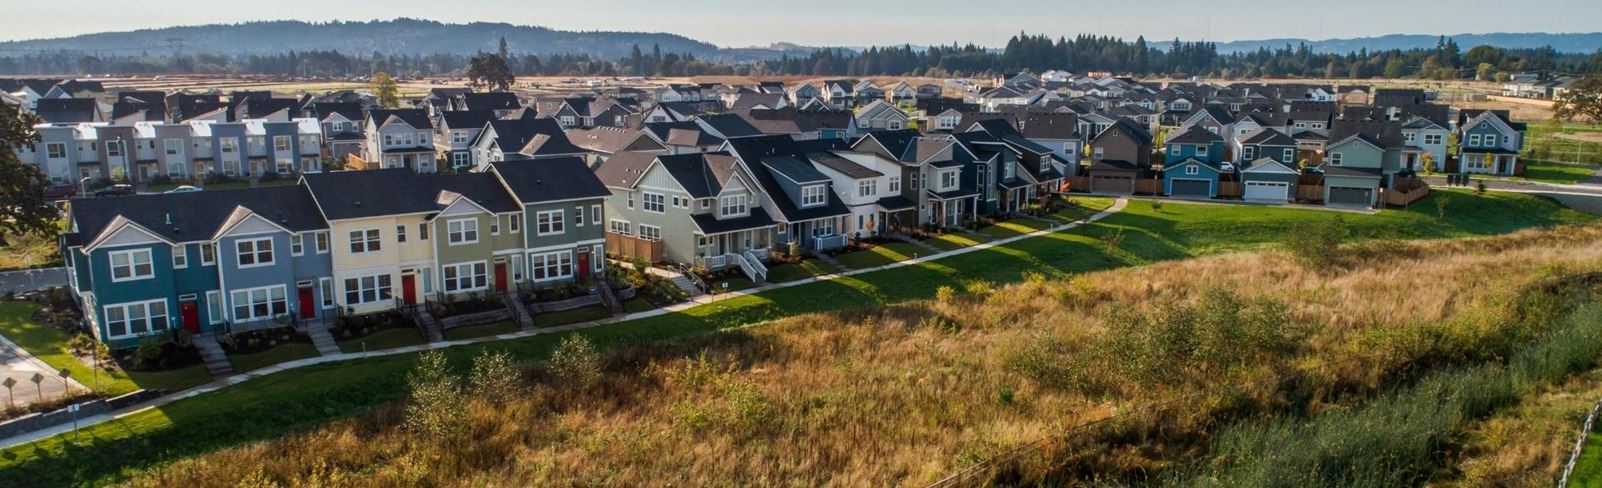 Townhomes at Reed's Crossing Hillsboro OR